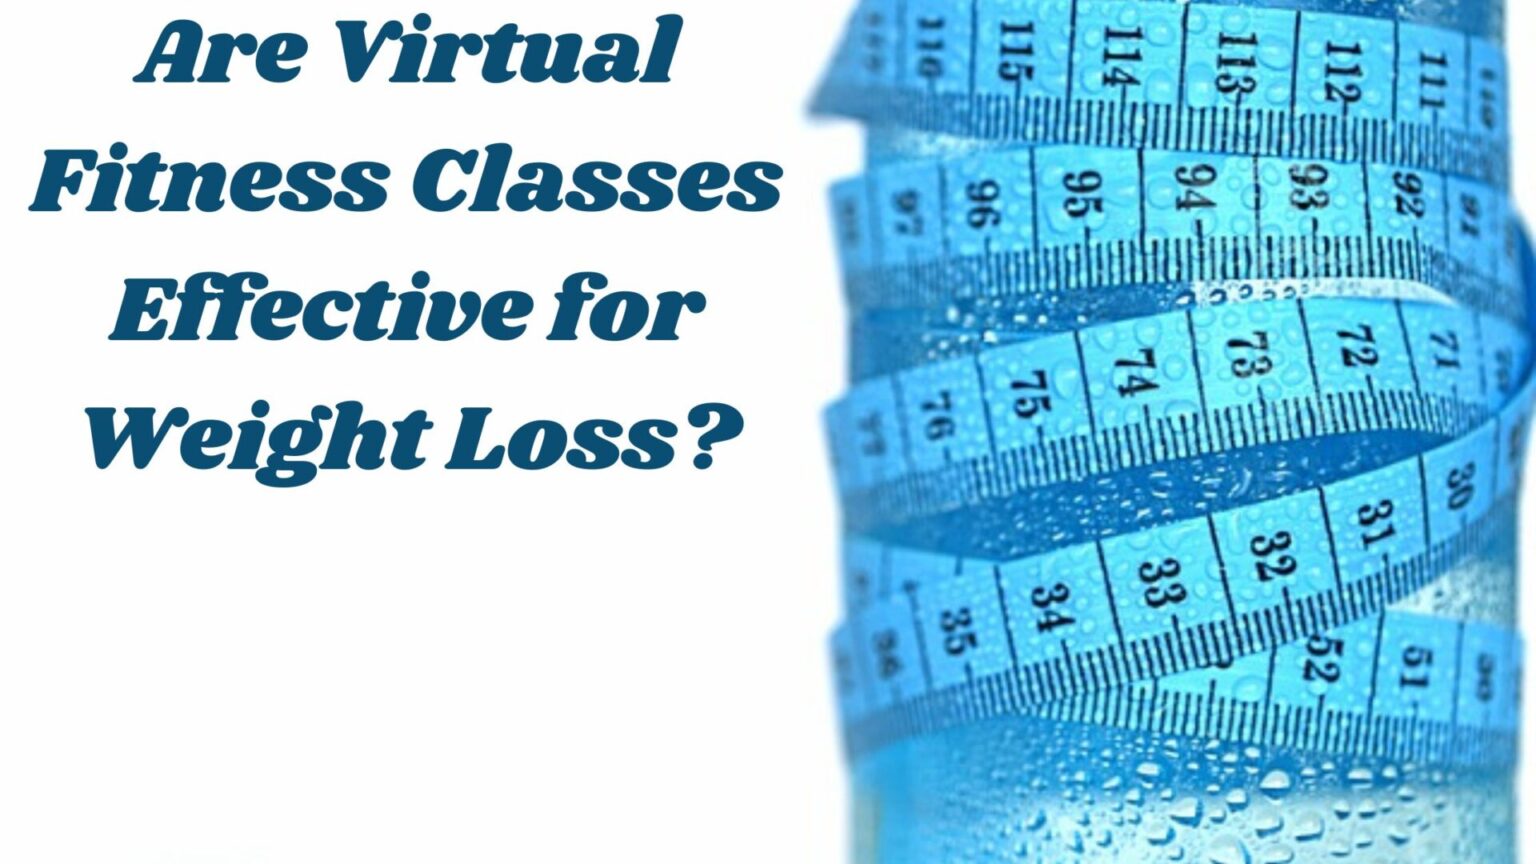 Are Virtual Fitness Classes Effective for Weight Loss?